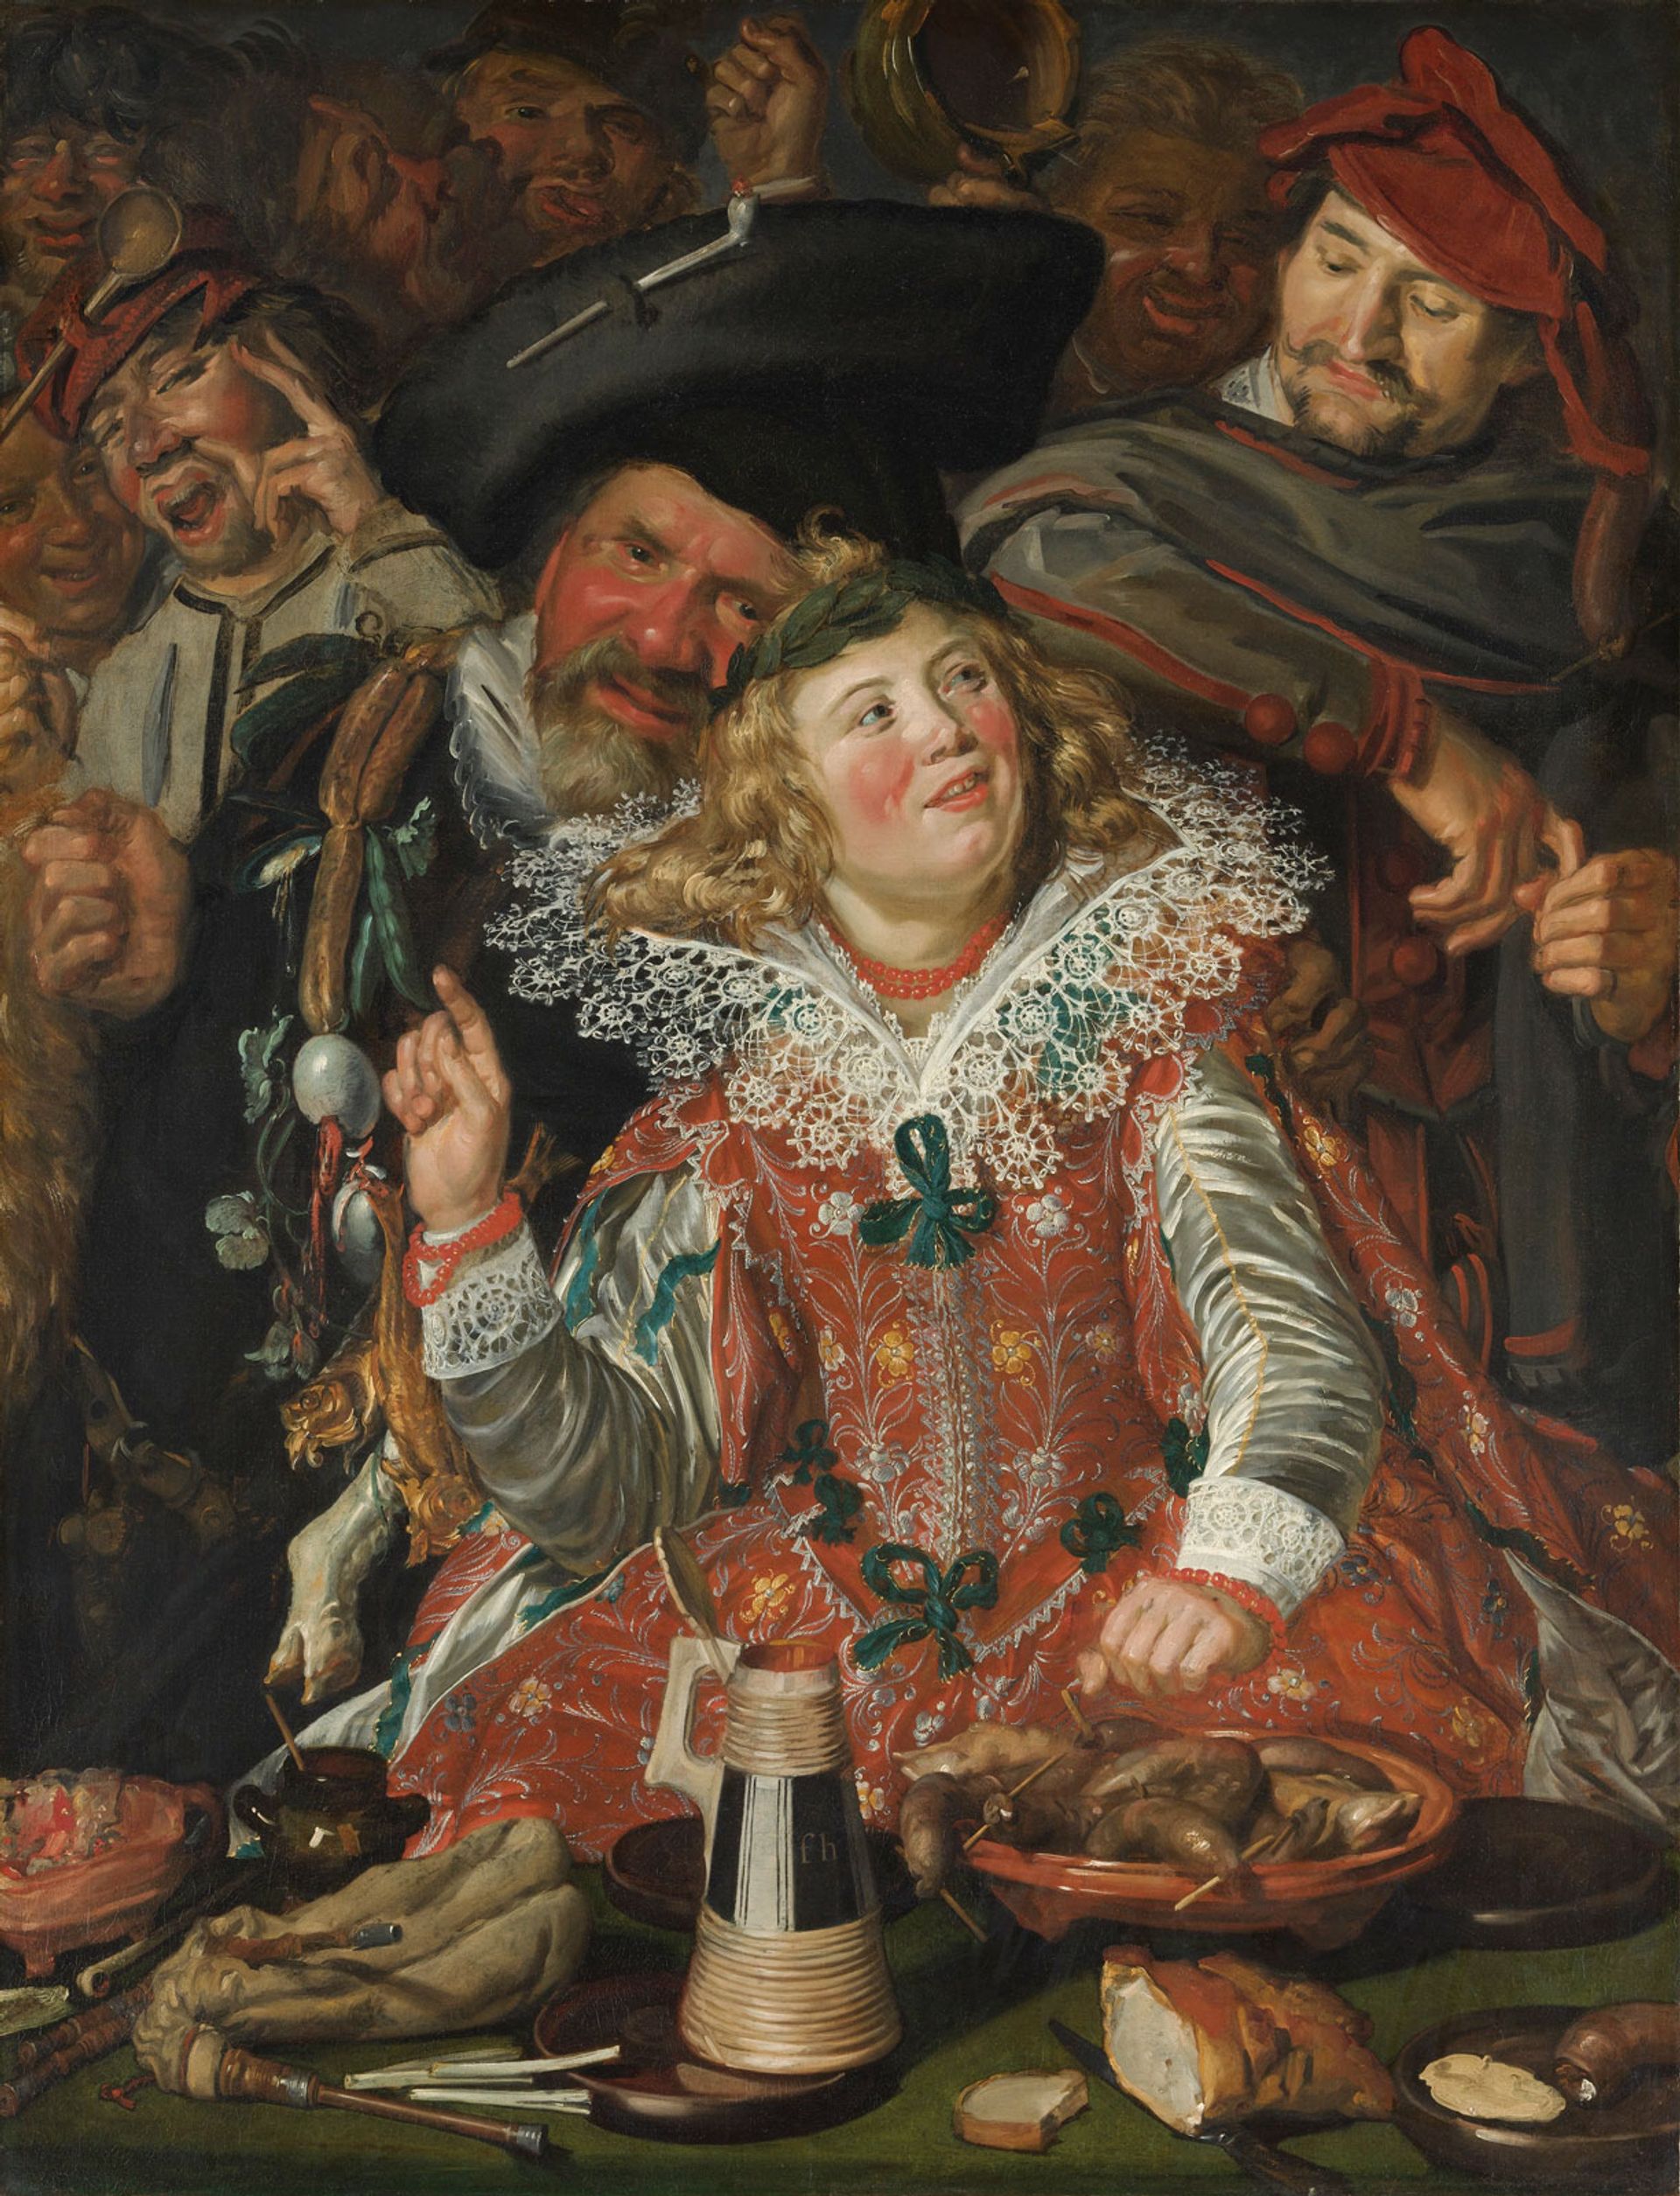 Merrymakers at Shrovetideca (around 1616-17) by Frans Hals